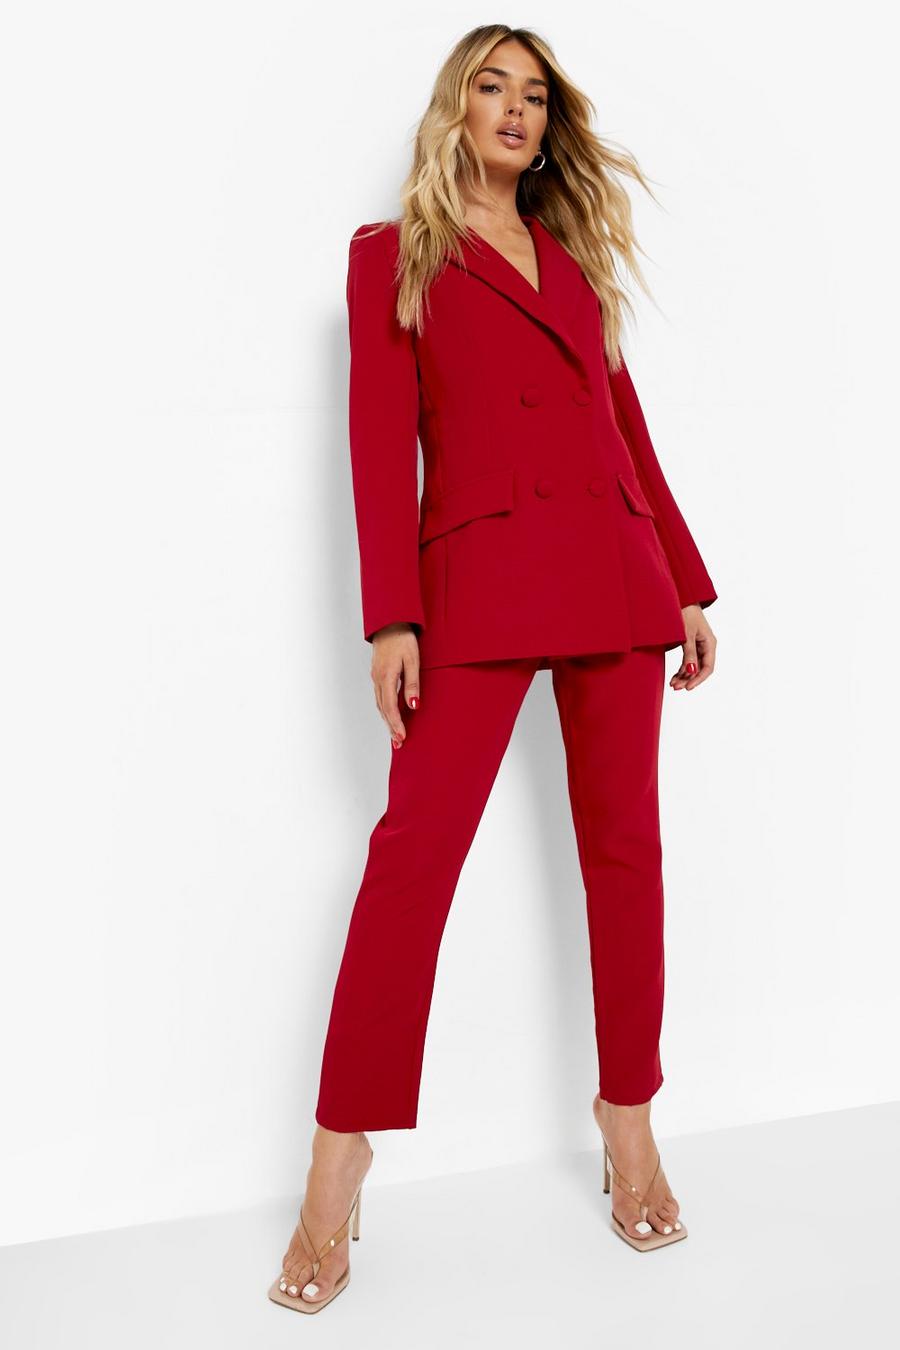 Berry red Self Fabric Belted Dress Pants